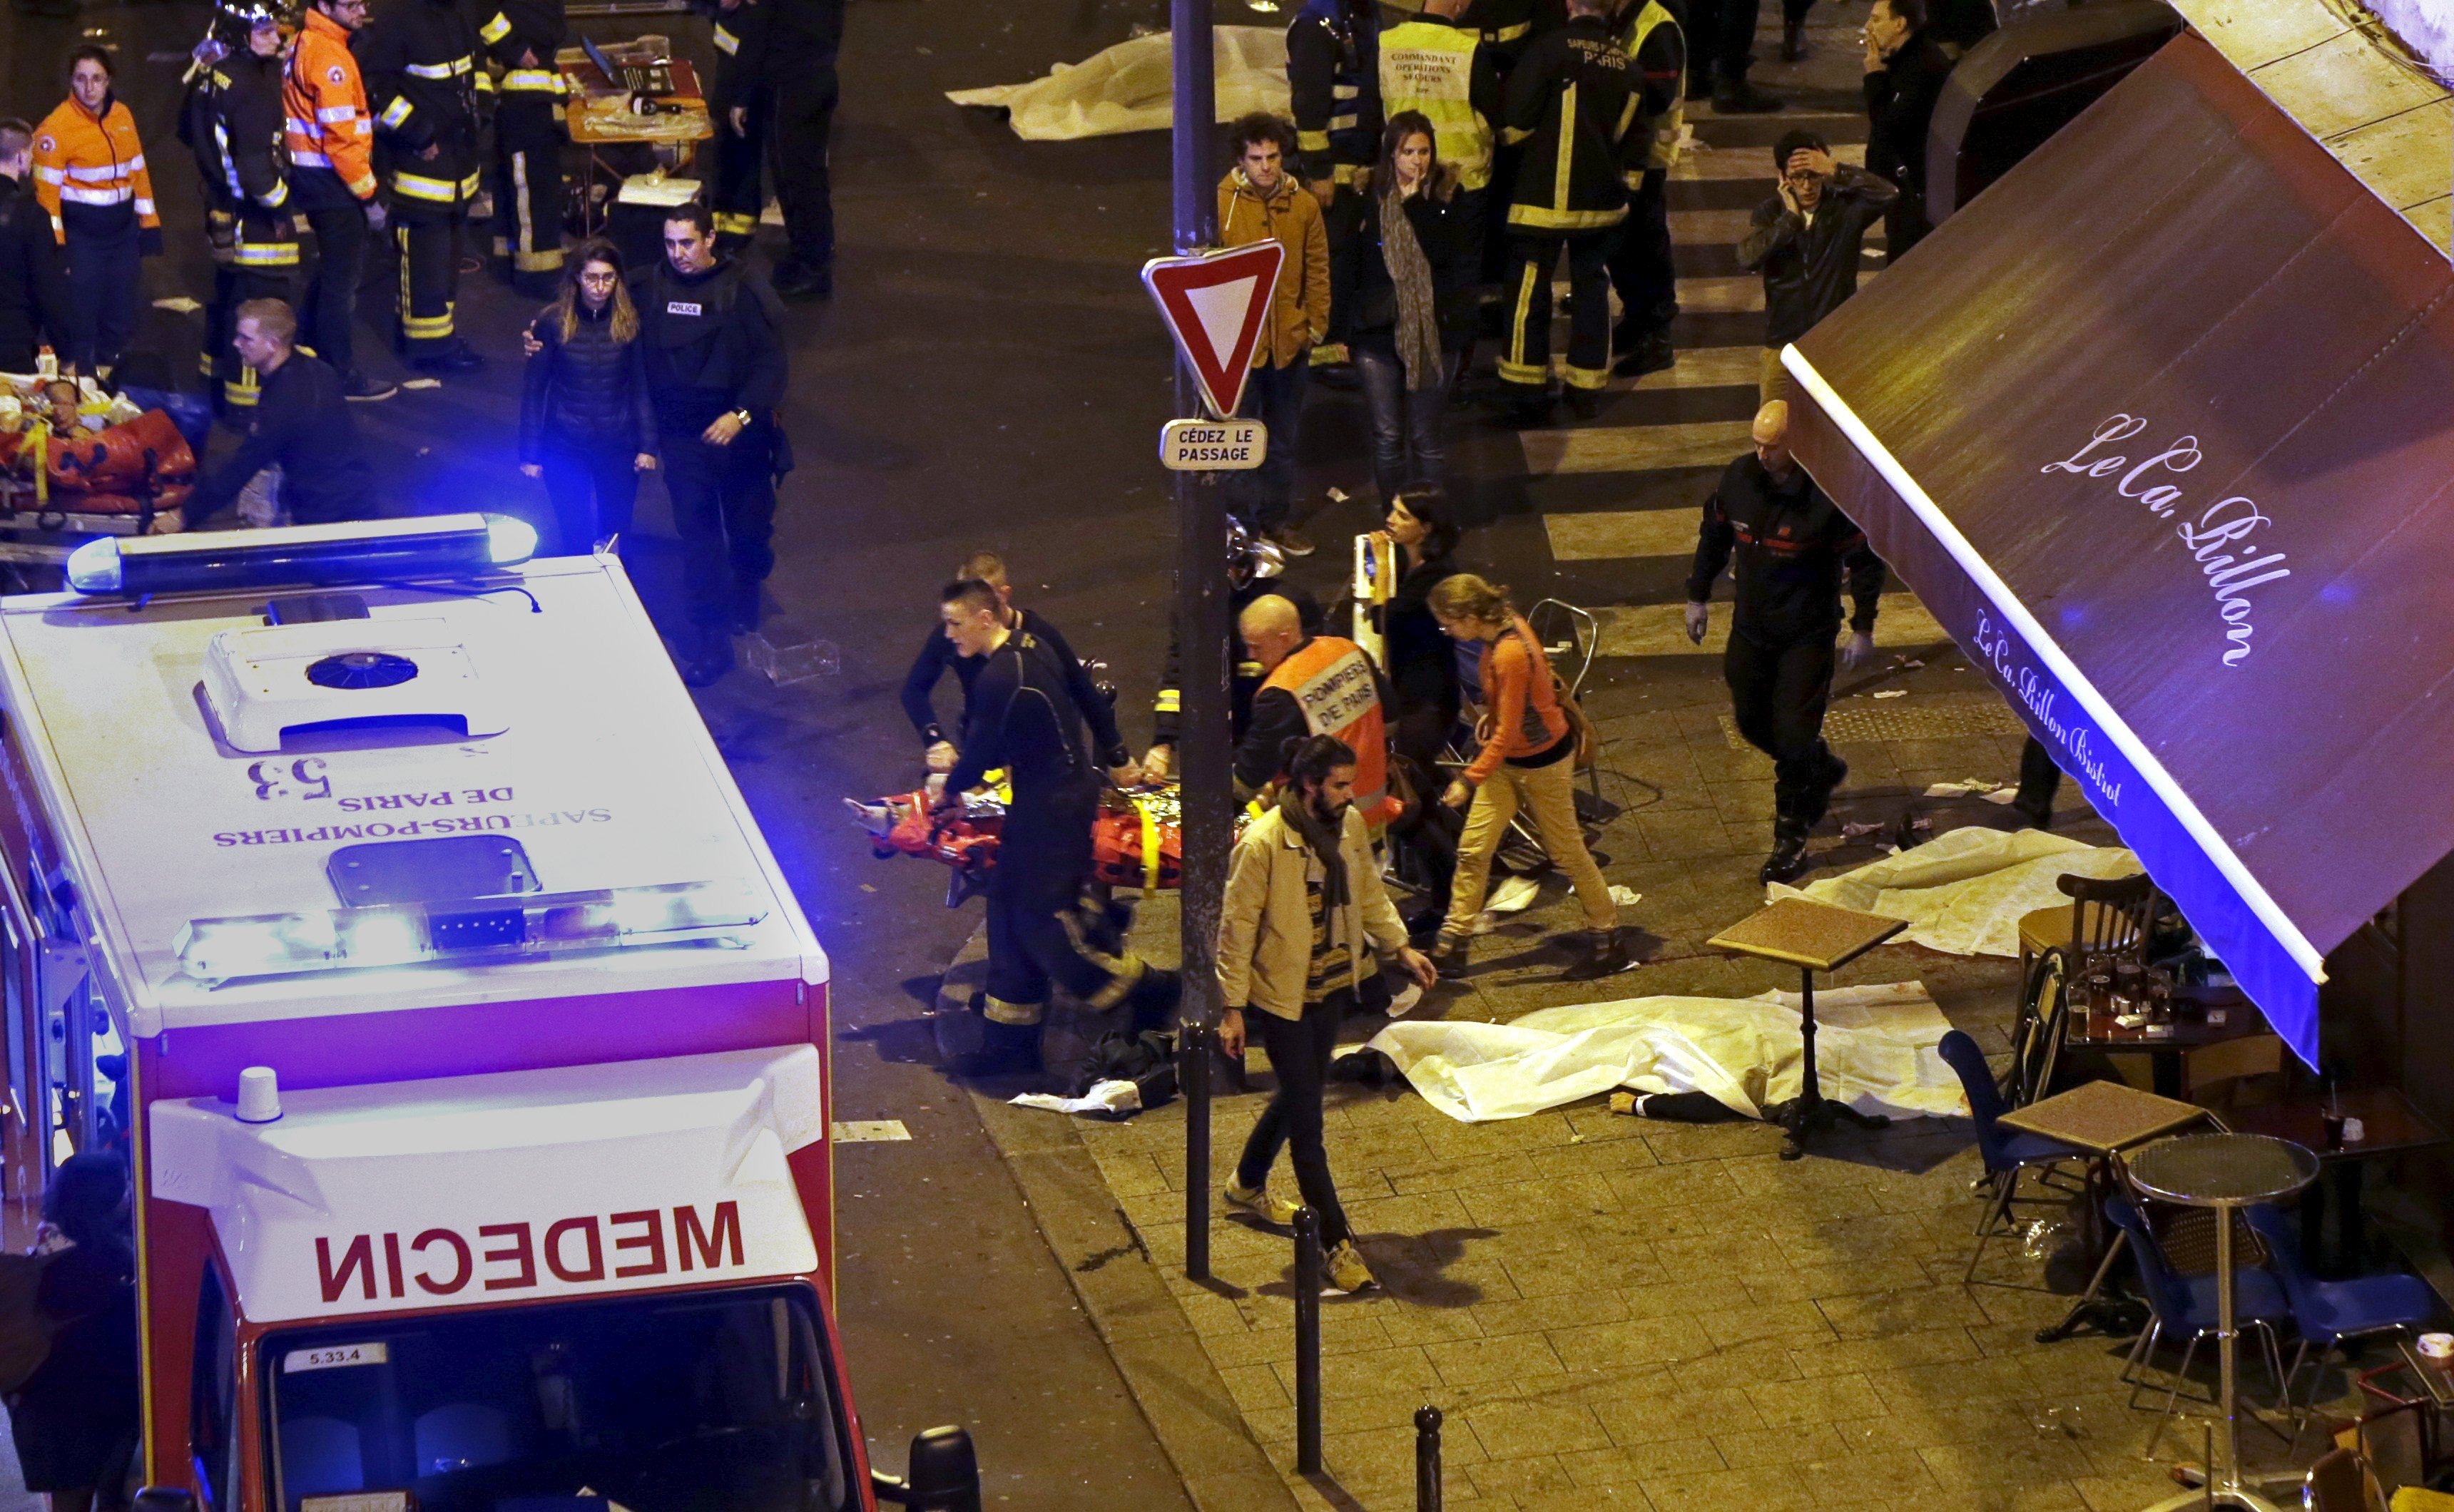 Rescuers move an injured person to an ambulance following the shooting incidents in Paris on November 13, 2015. Photo: Reuters